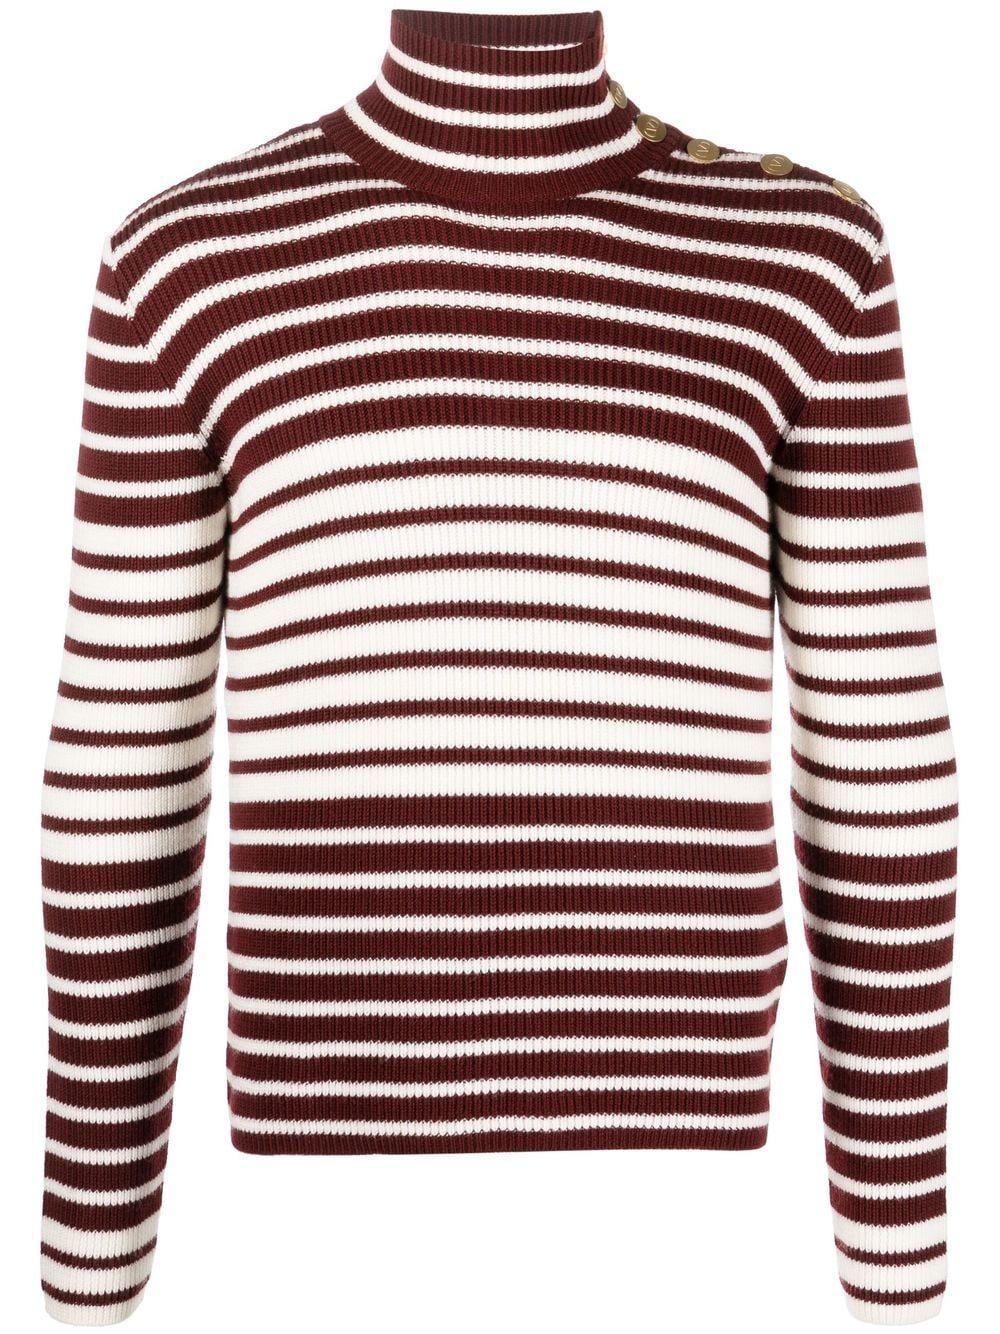 Men's Ivory and Bordeaux Knit Wool Sweater for FW22